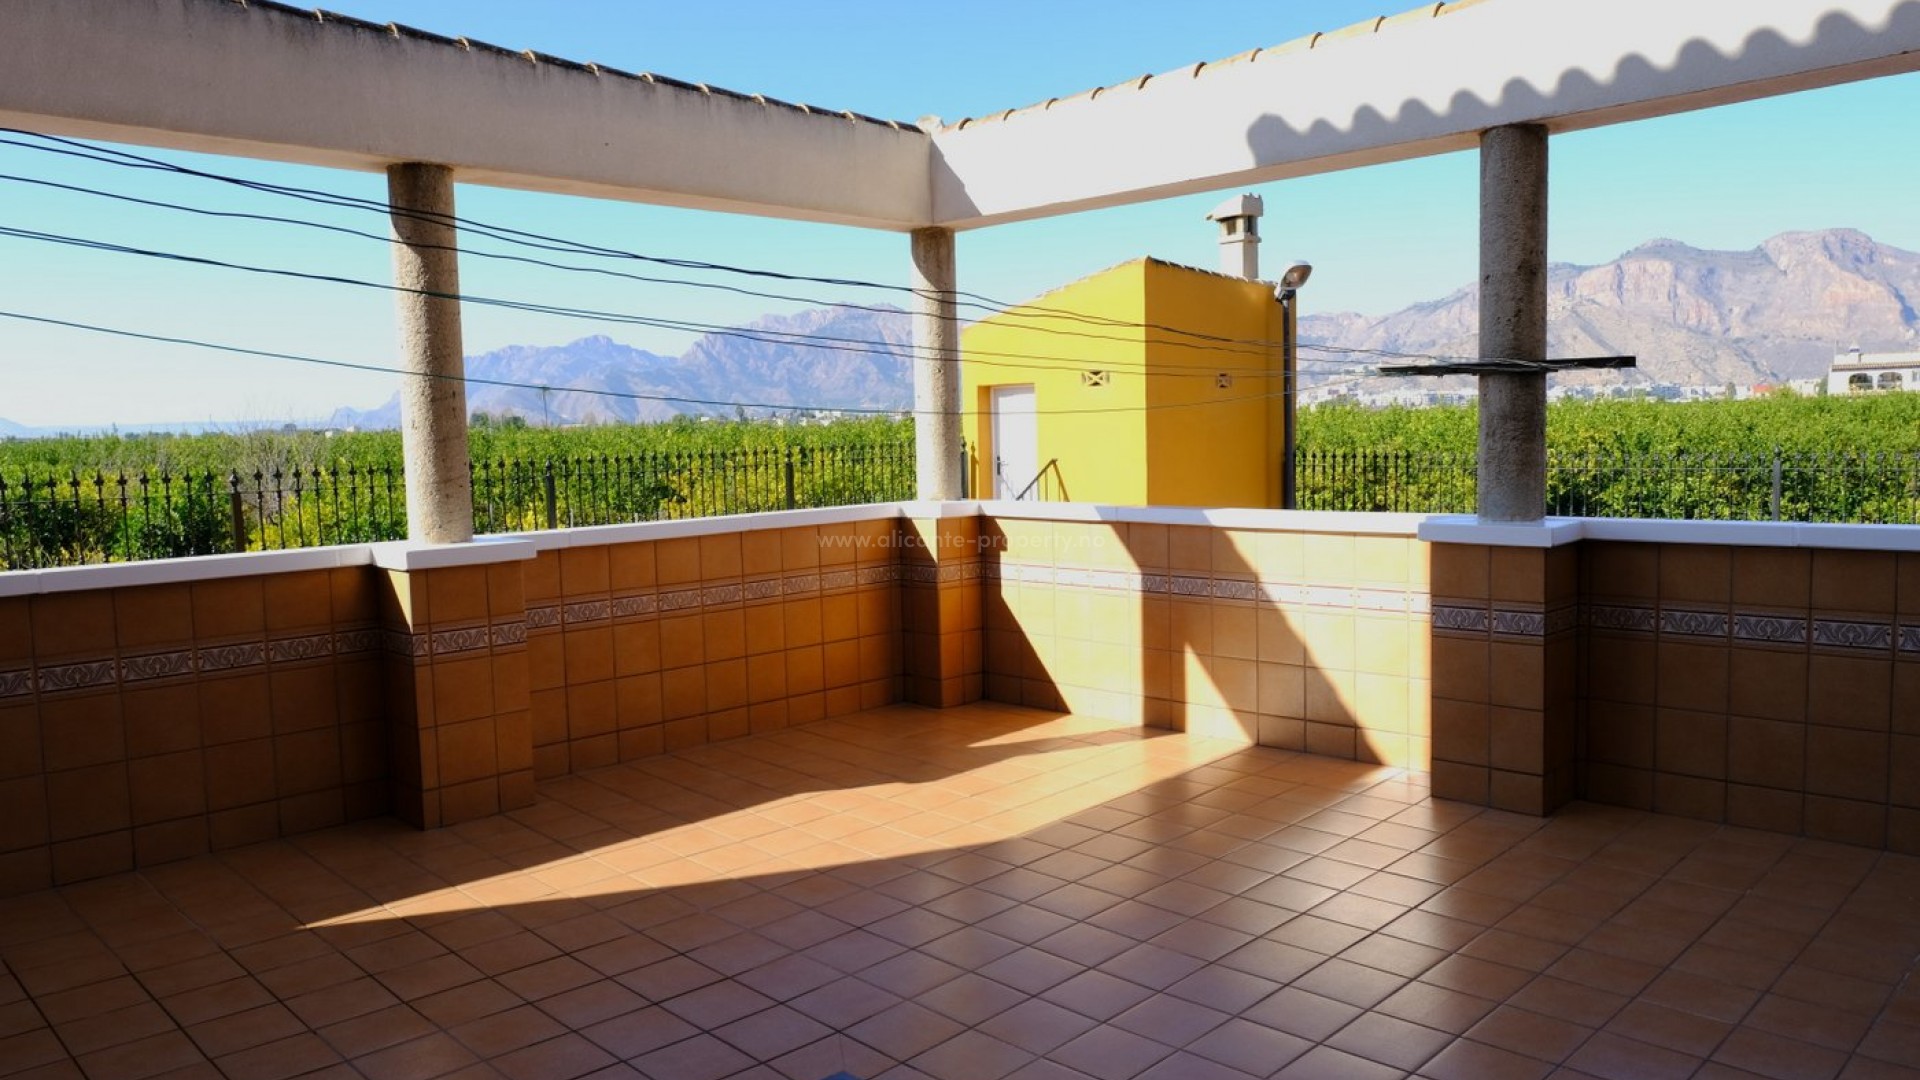 Country Property in Orihuela